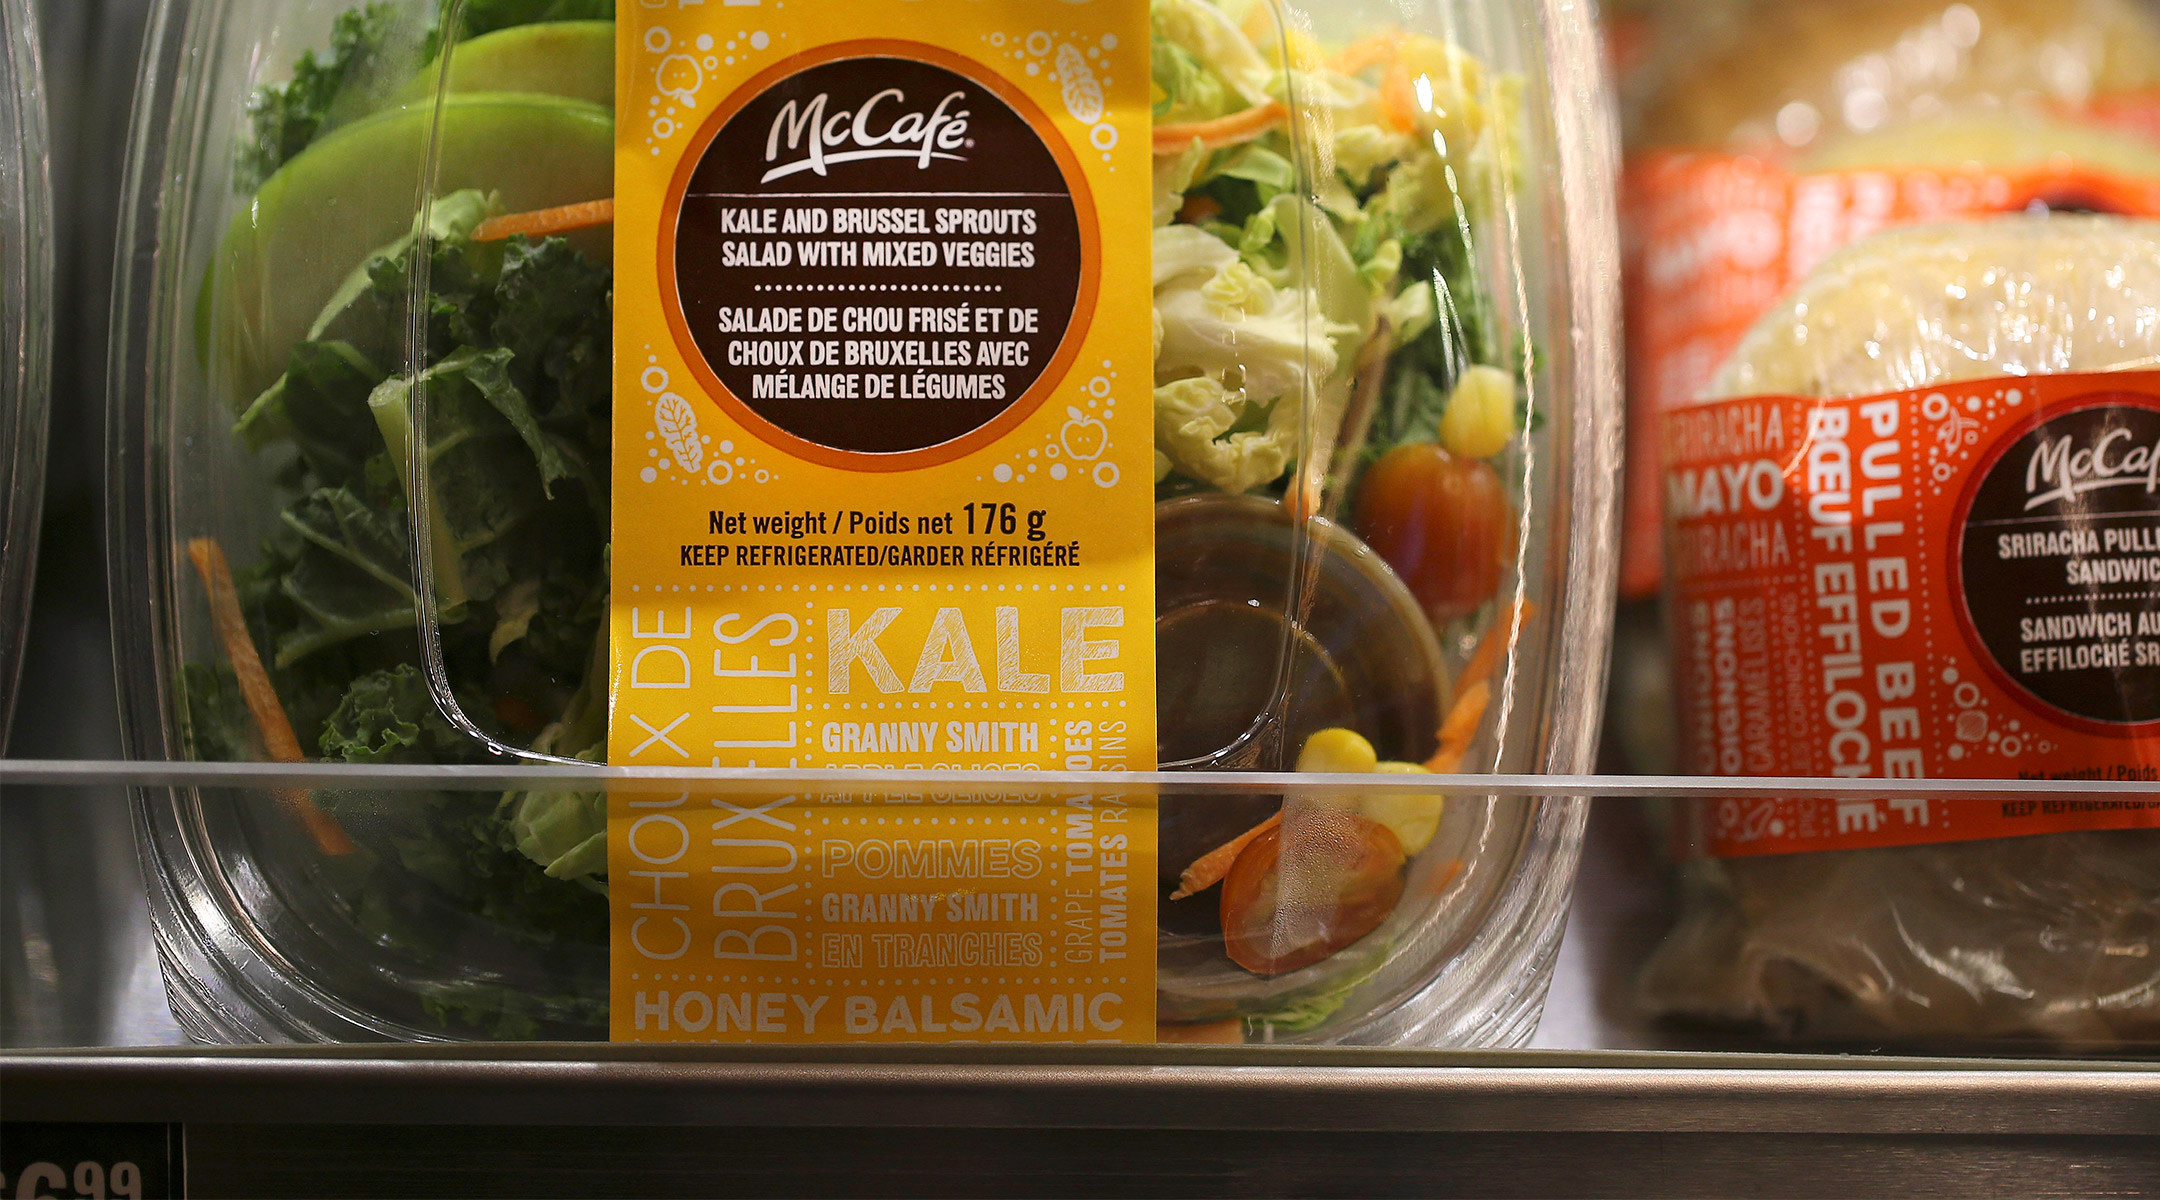 mcdonald's pre-packaged kale salad. mcdonald's salads causing food poisoning.